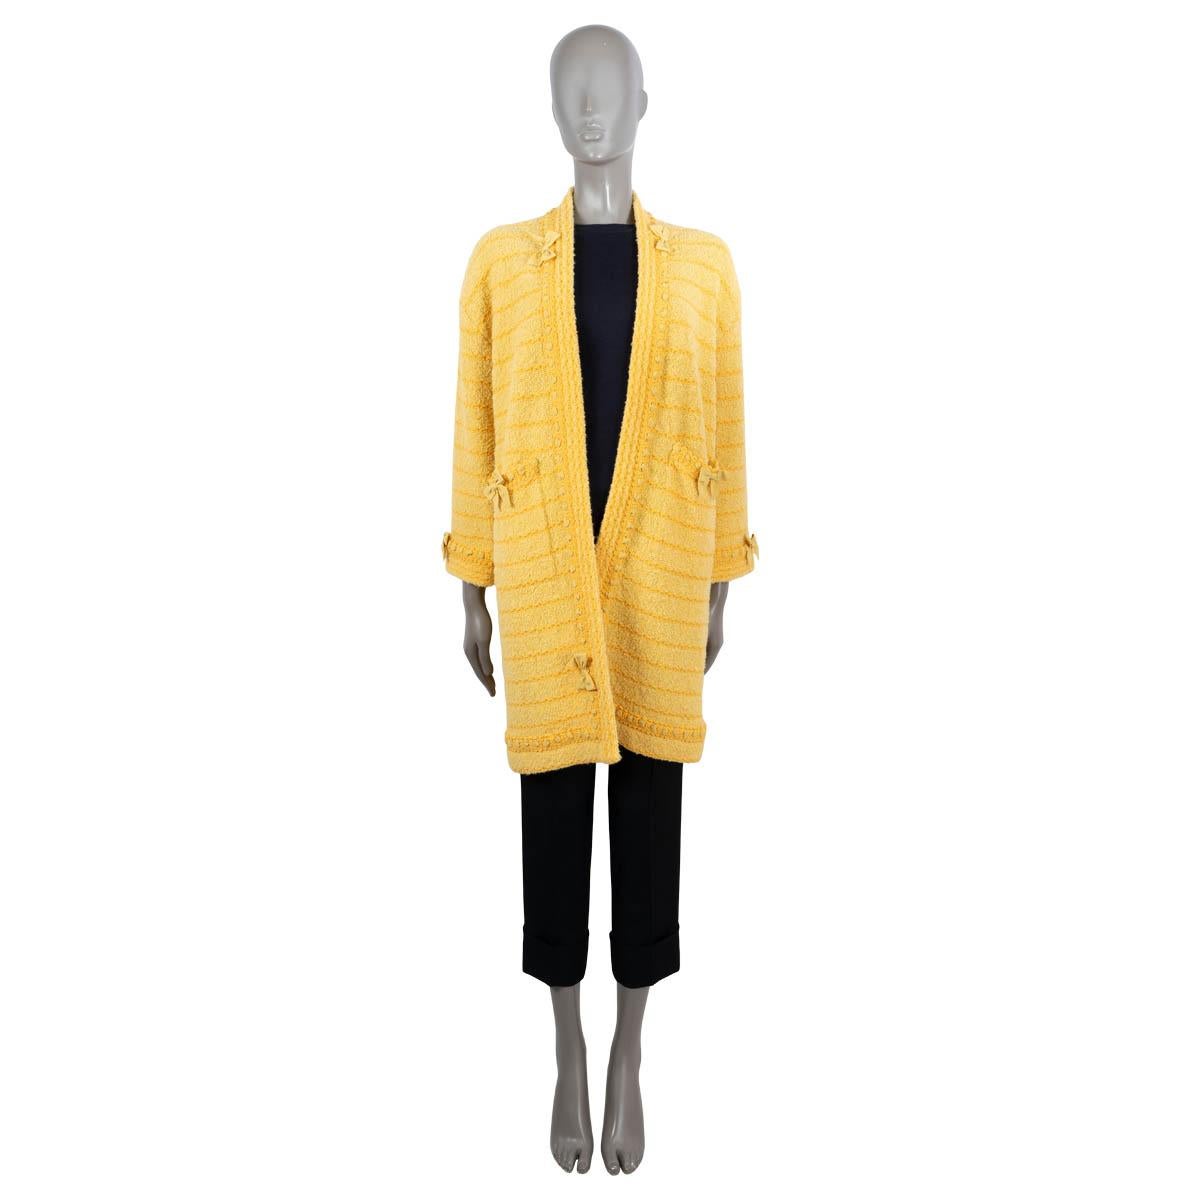 100% authentic Gucci open striped bouclé knit coat in two tone yellow wool (with 5% polyamide). Features ribbon trims with bows and two open pockets. Unlined. Has been worn and is in excellent condition.

2020 Resort

Measurements
Tag